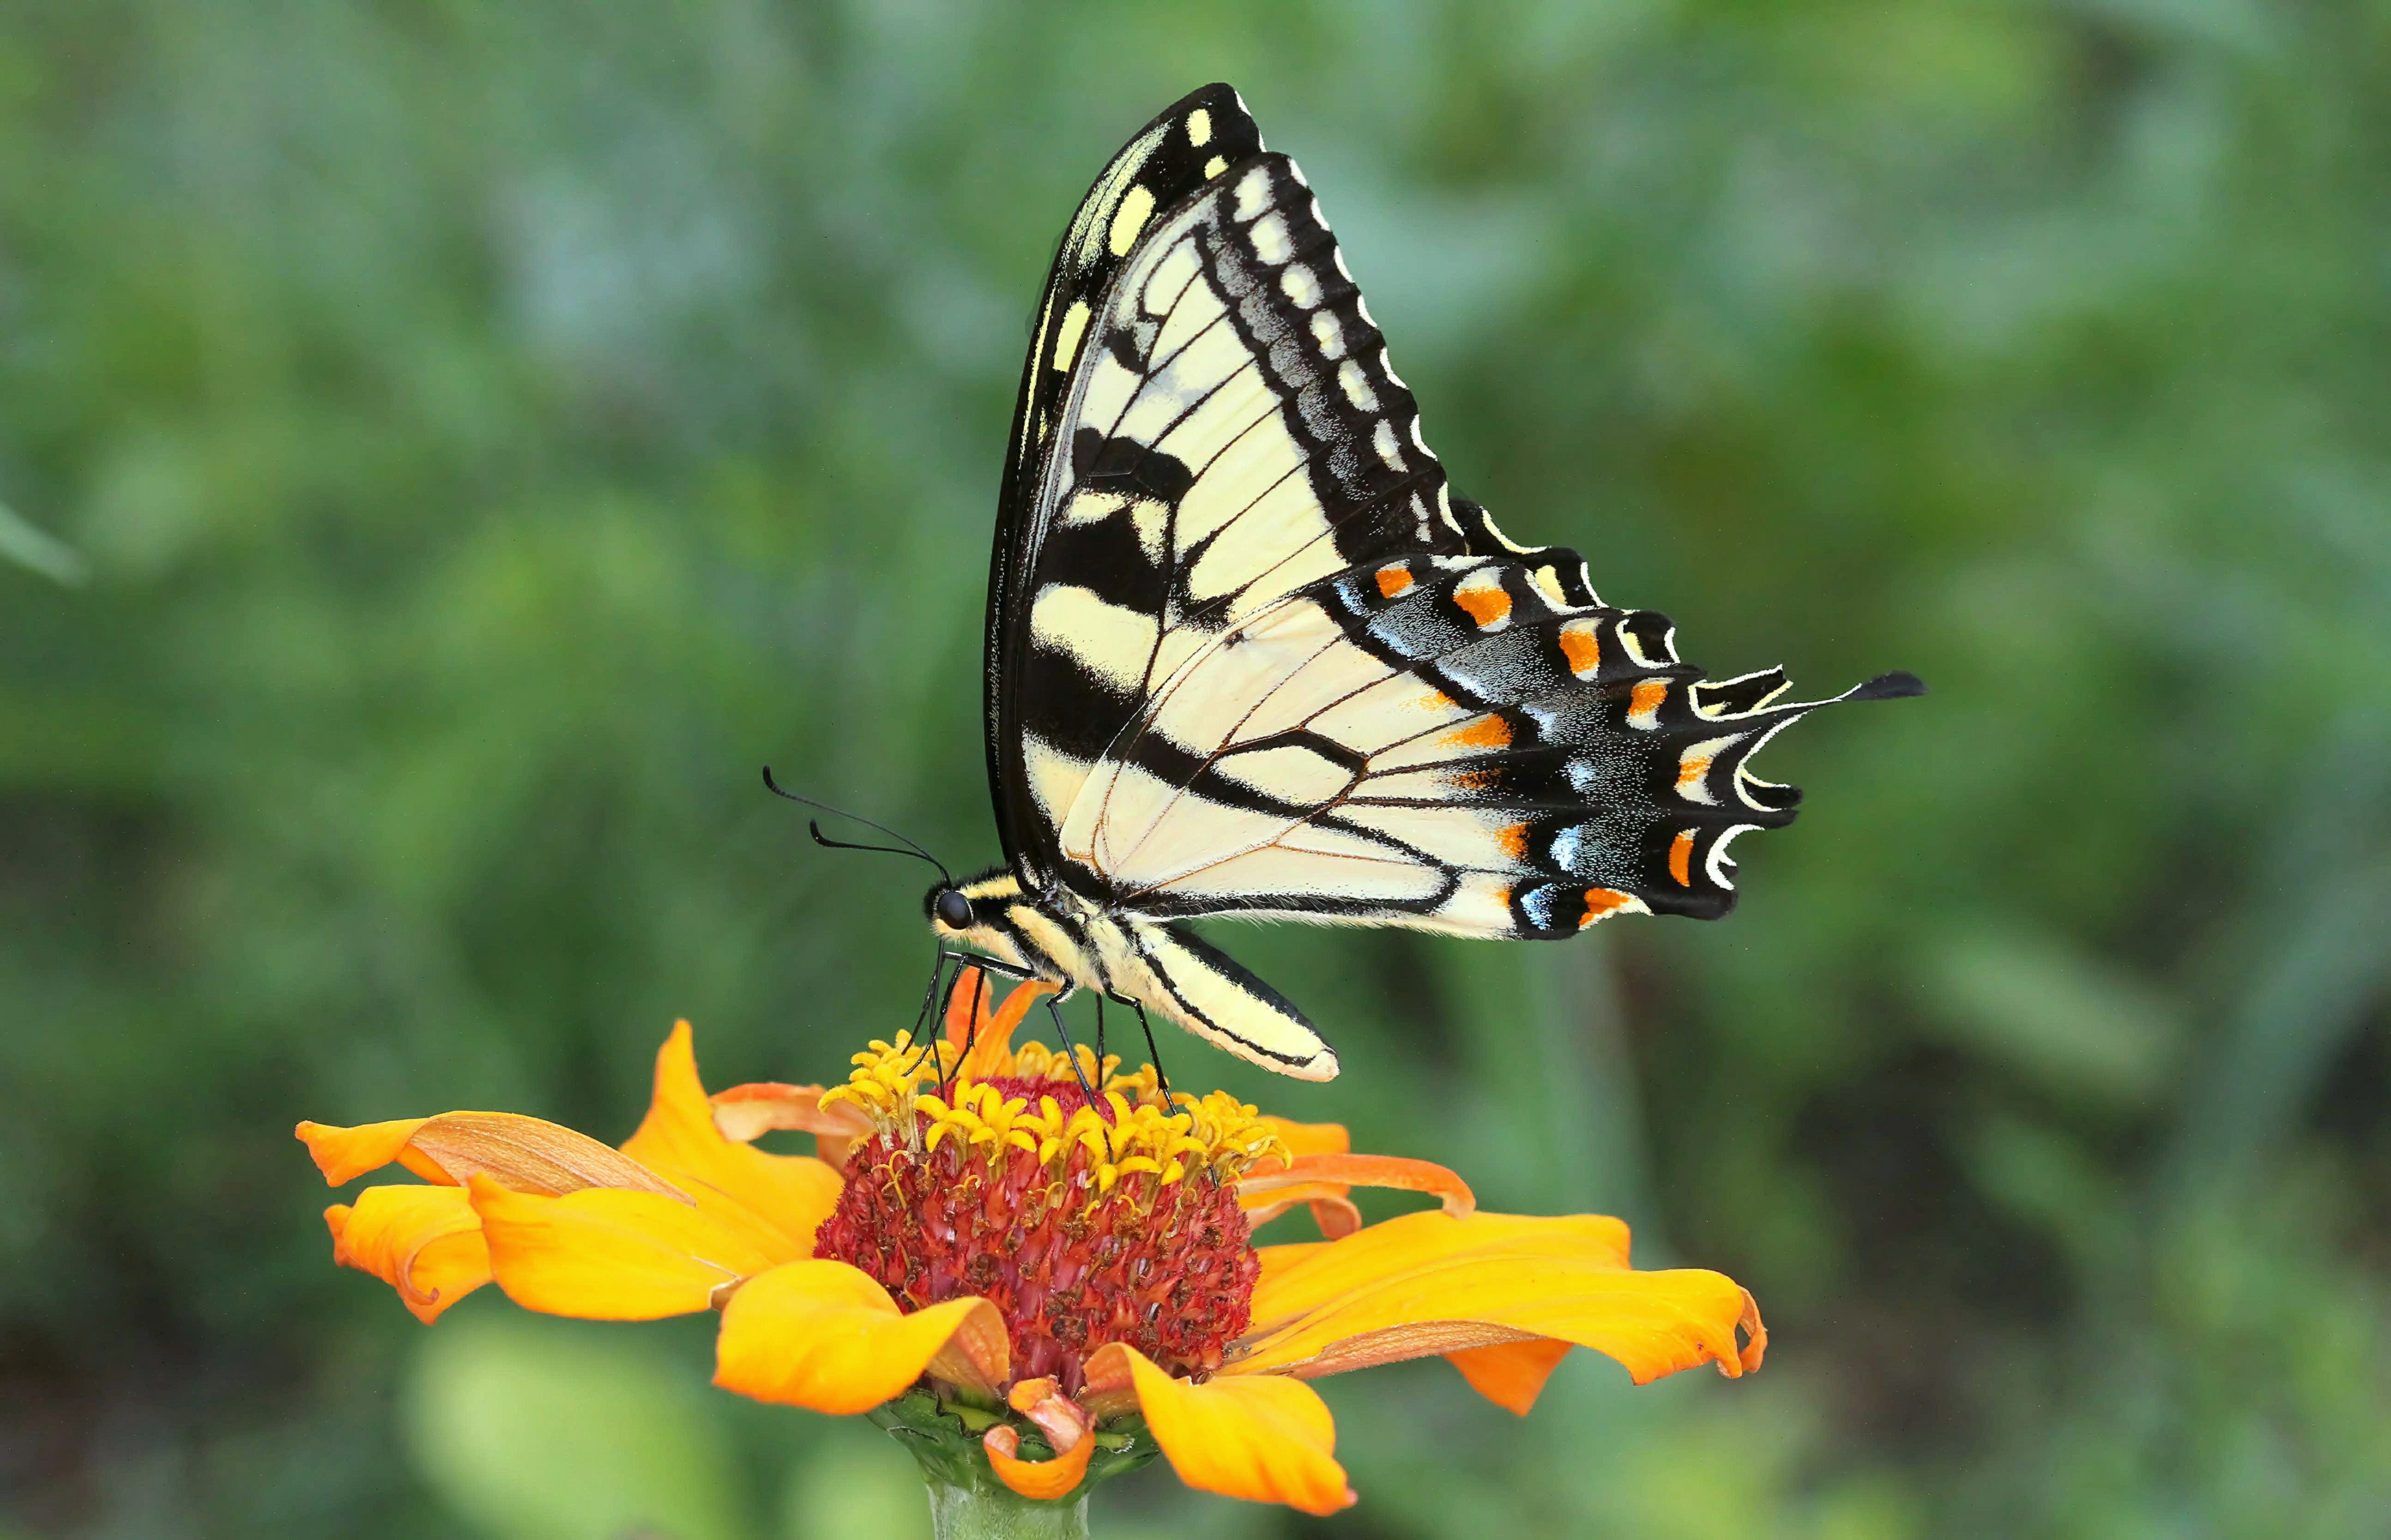 Tiger Swallowtail Butterfly perched on yellow flower HD ...